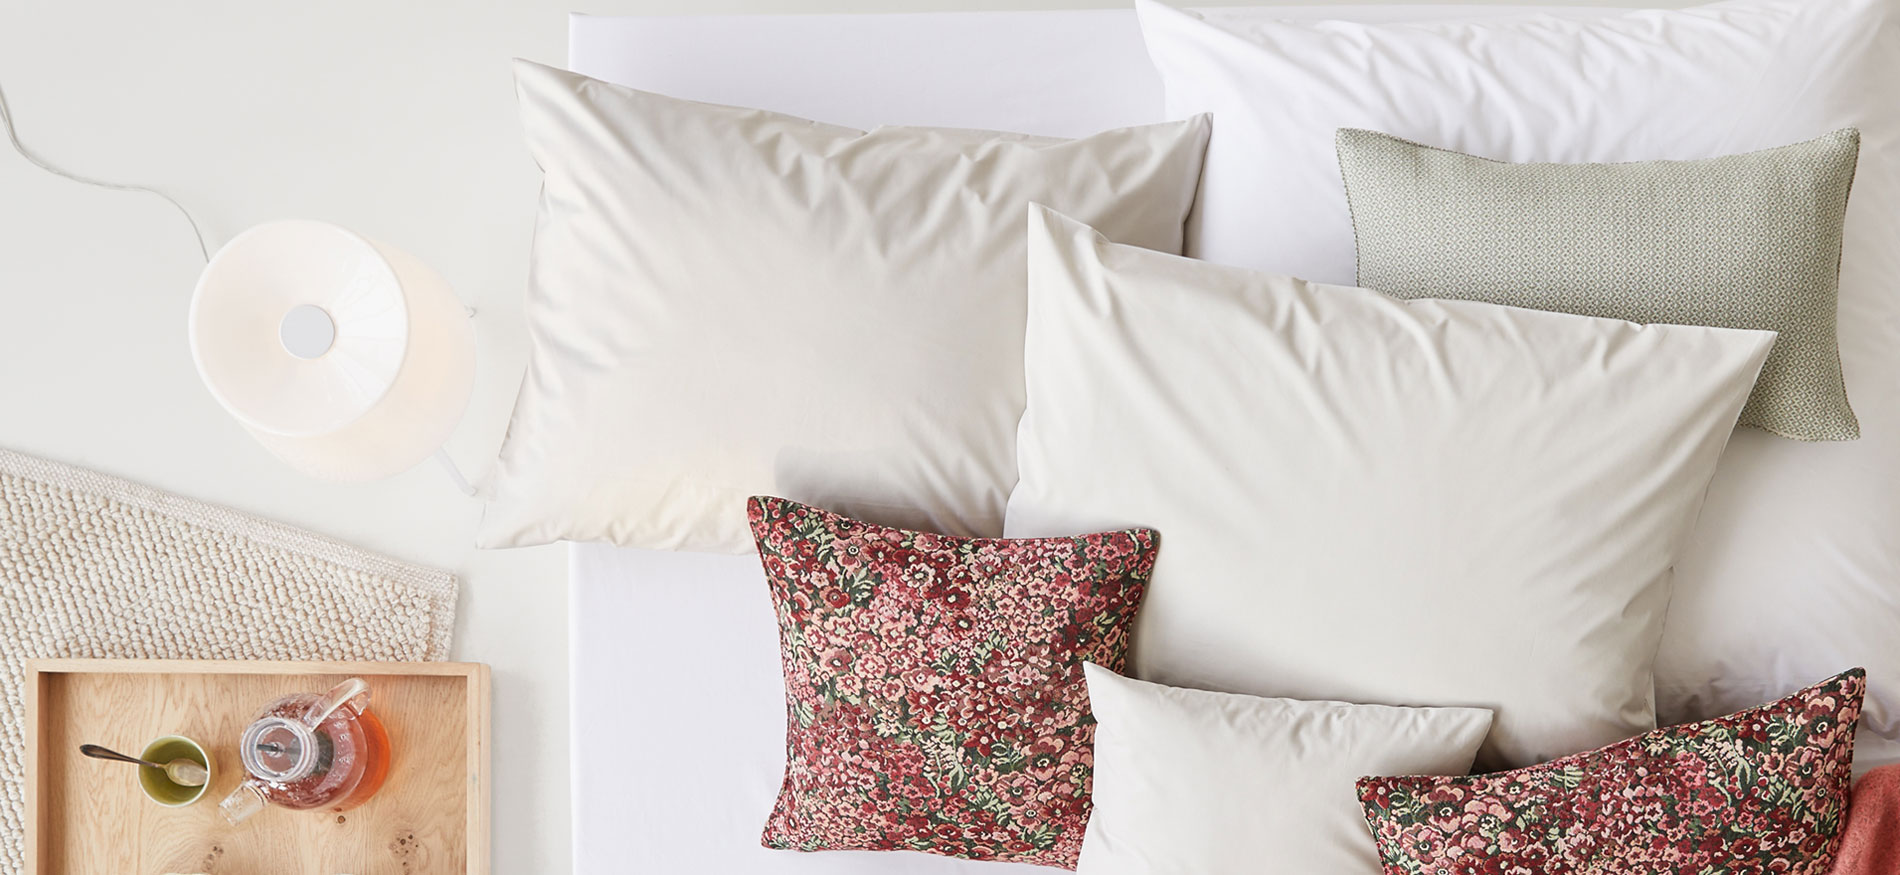 DECODE by LUIZ Bed Linen Collection